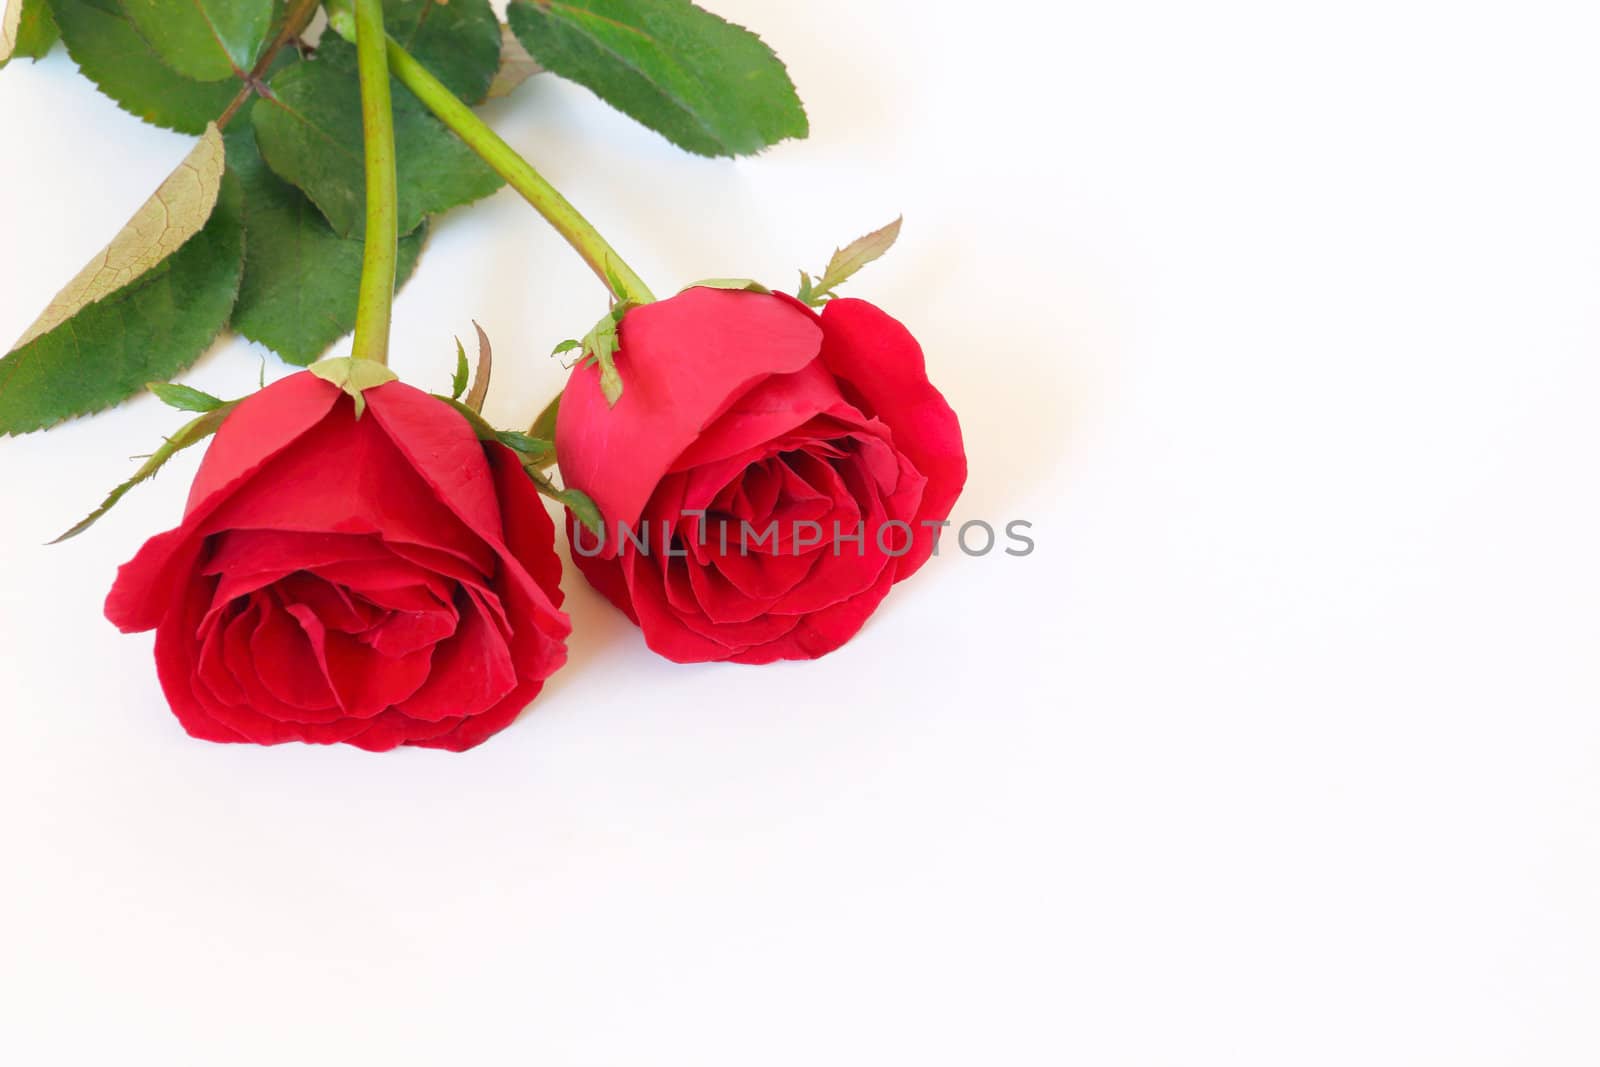 Two red roses on white background with space for text